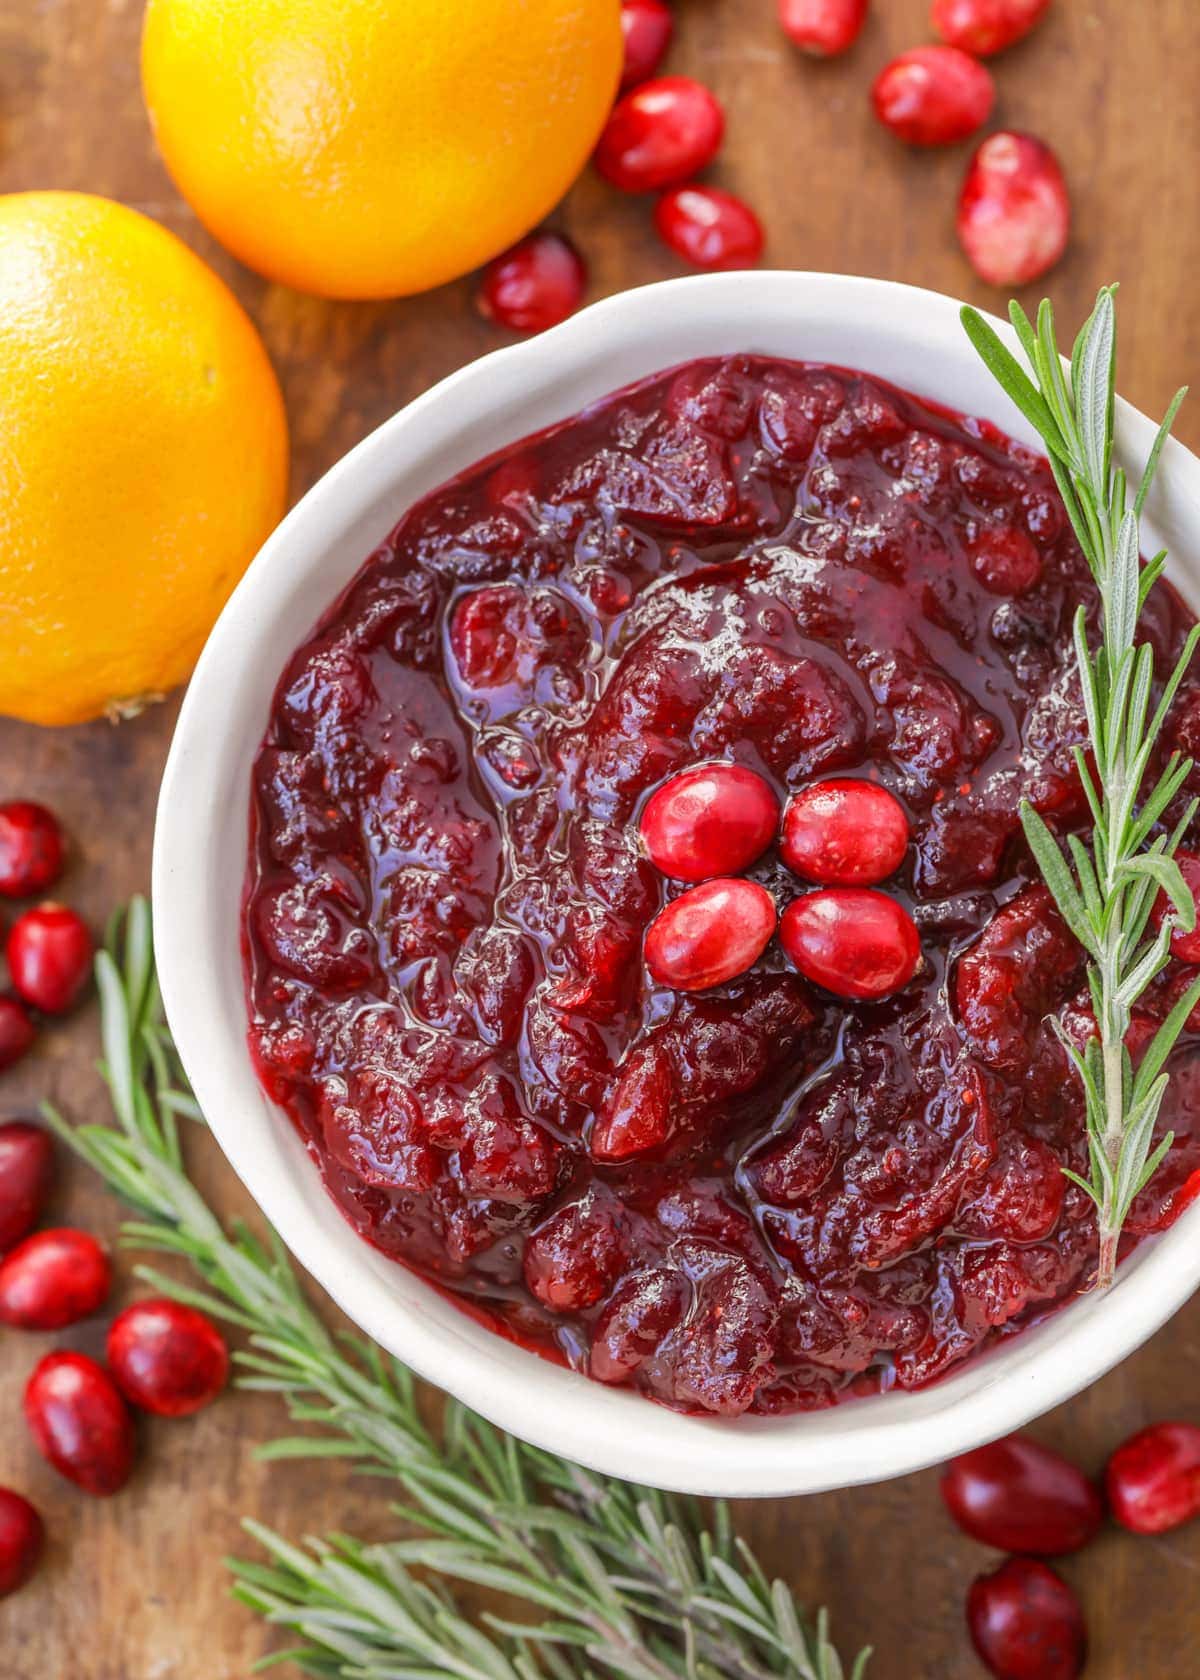 Homemade cranberry sauce in a white dish